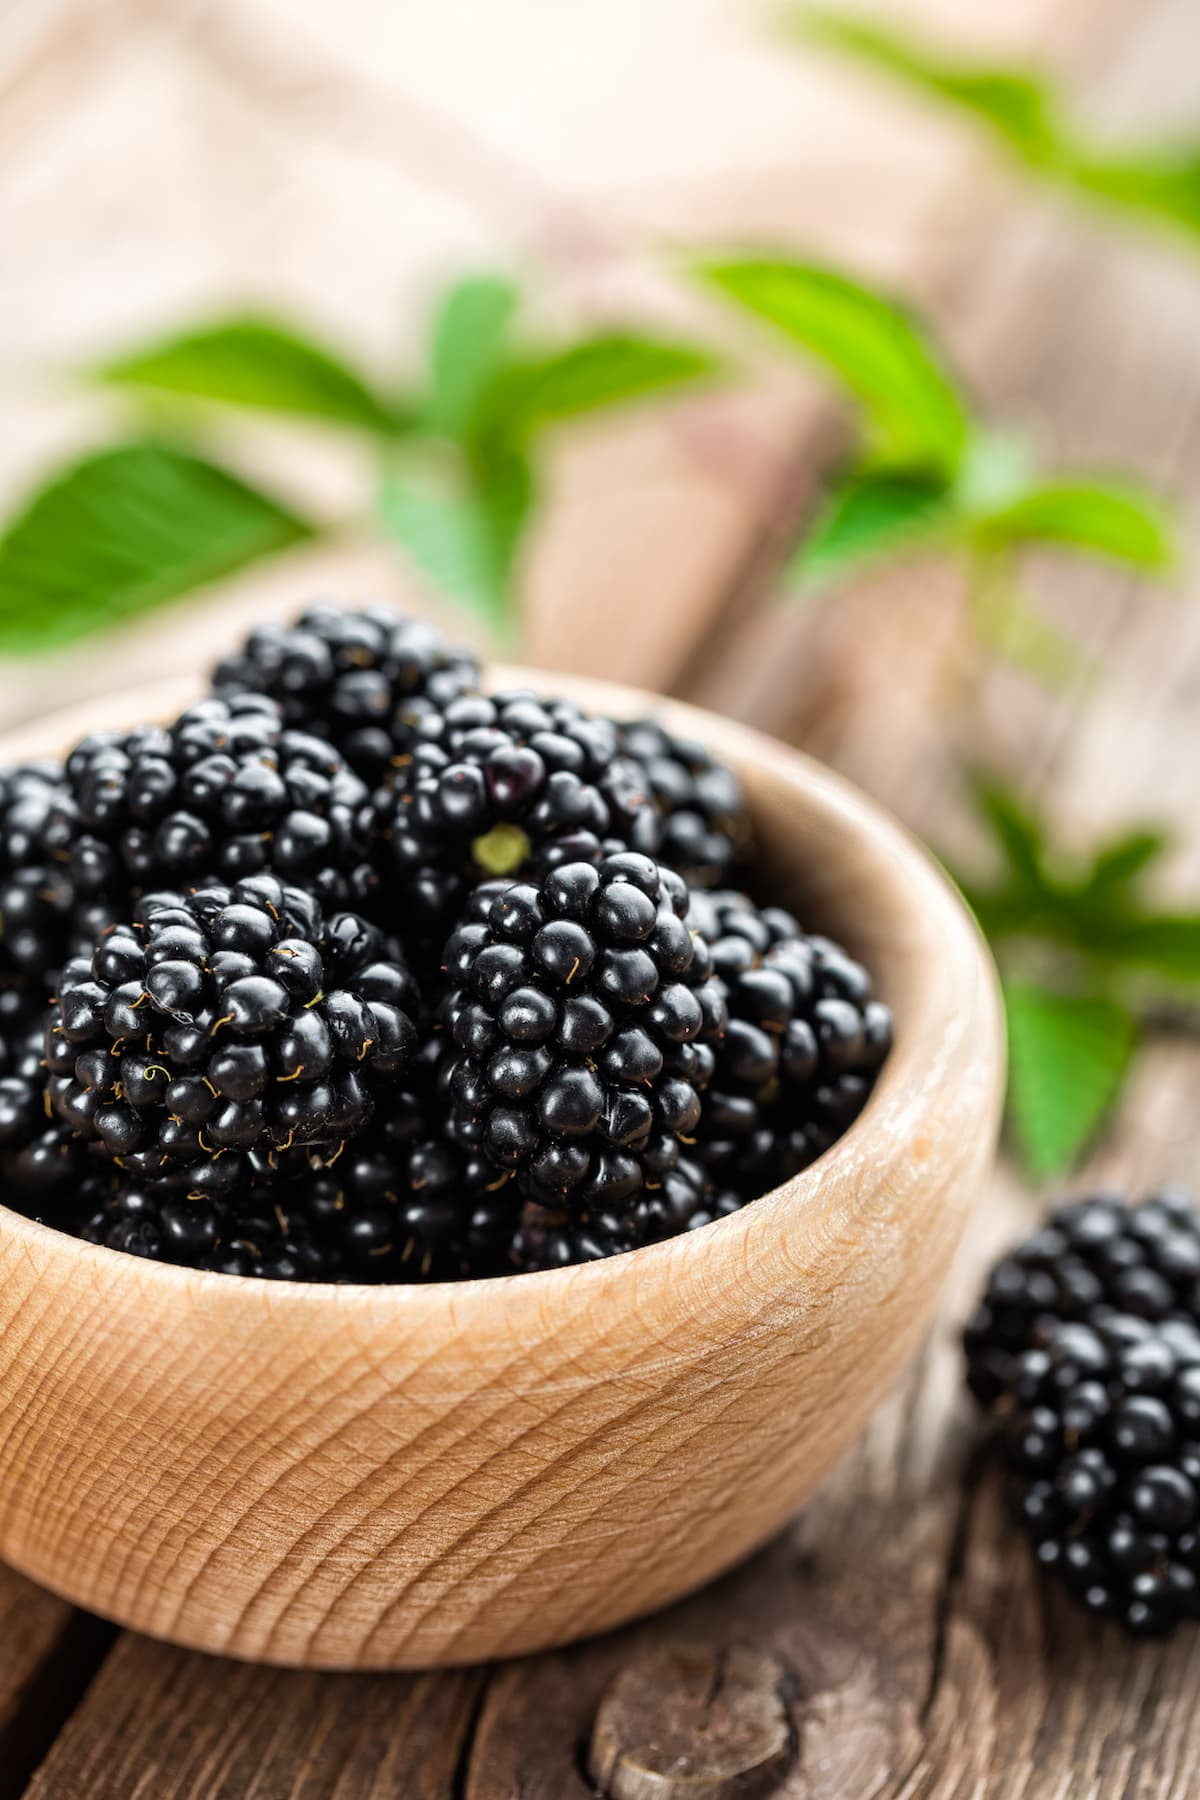 a picture of blackberries in a wooden bowl on a table.